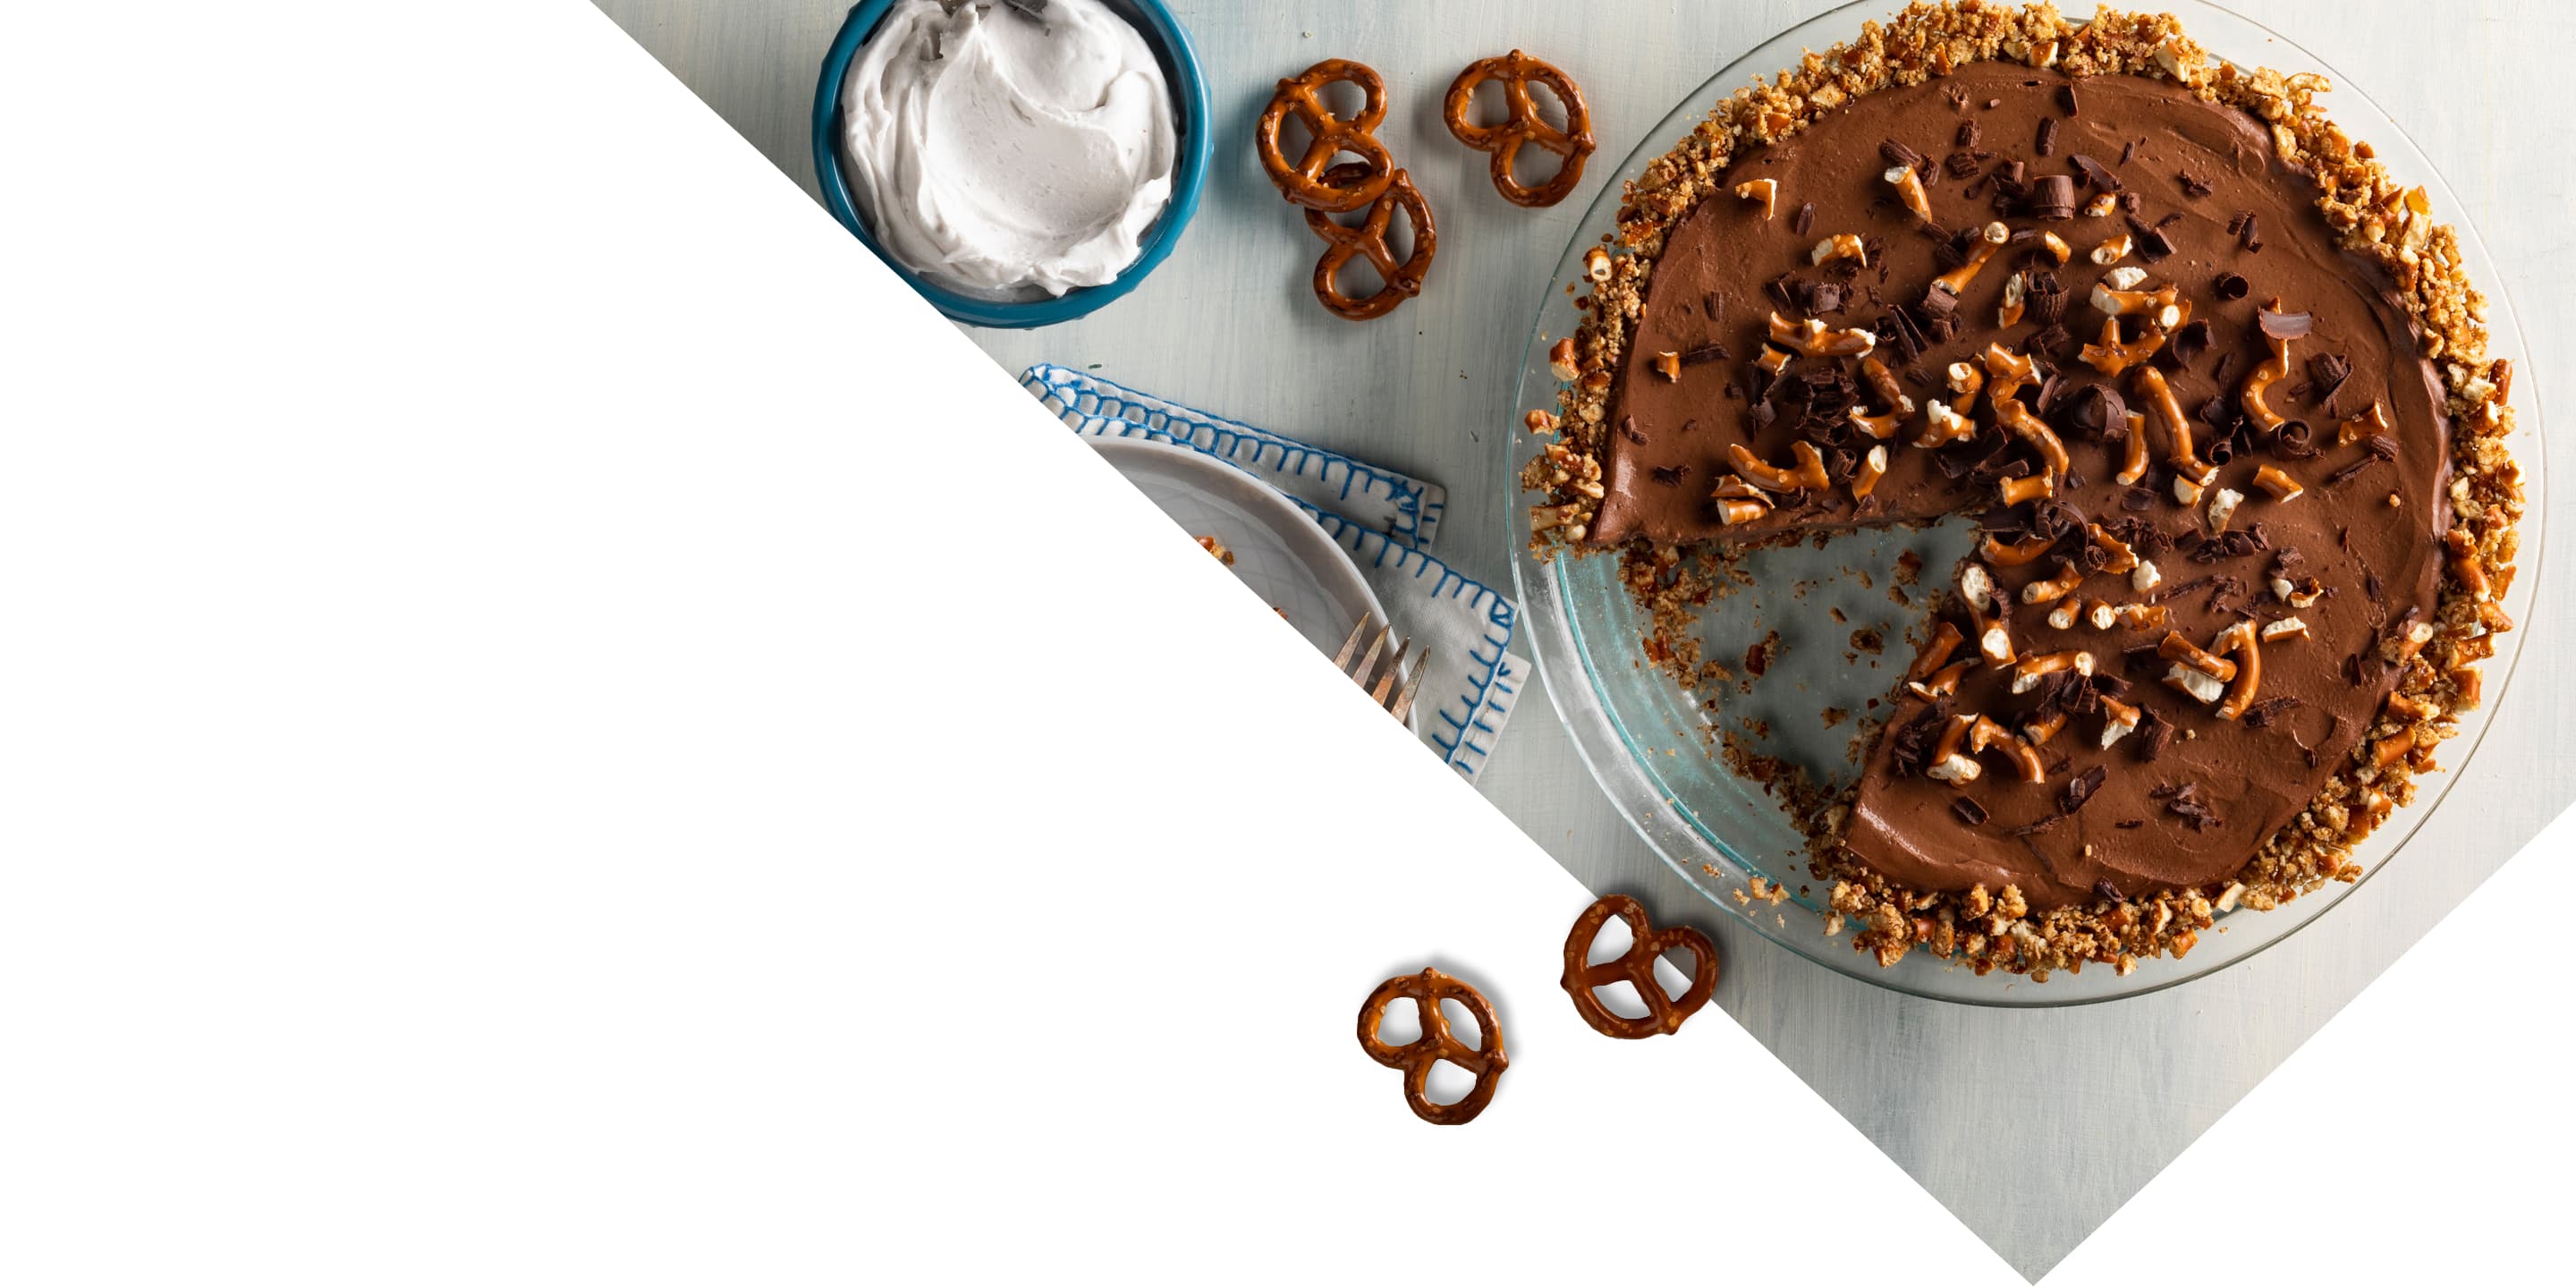 Table with vegan chocolate mousse topped with crushed pretzels and chocolate